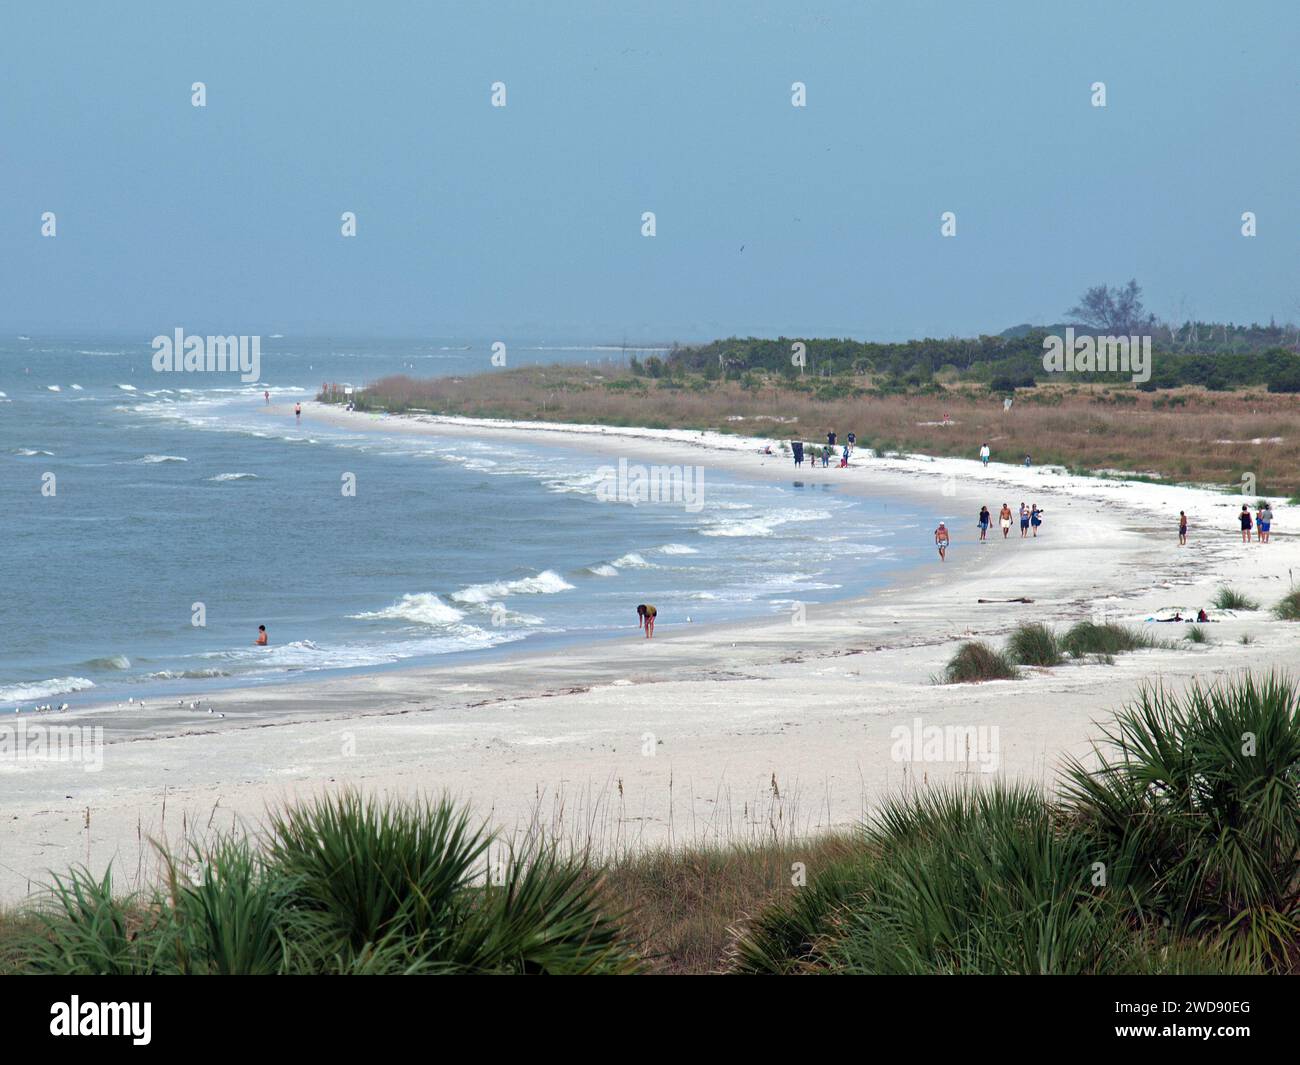 St. Petersburg, Florida, United States - December 24, 2015: Beach in Fort De Soto County Park. Gulf of Mexico. People walking on the shores. Stock Photo